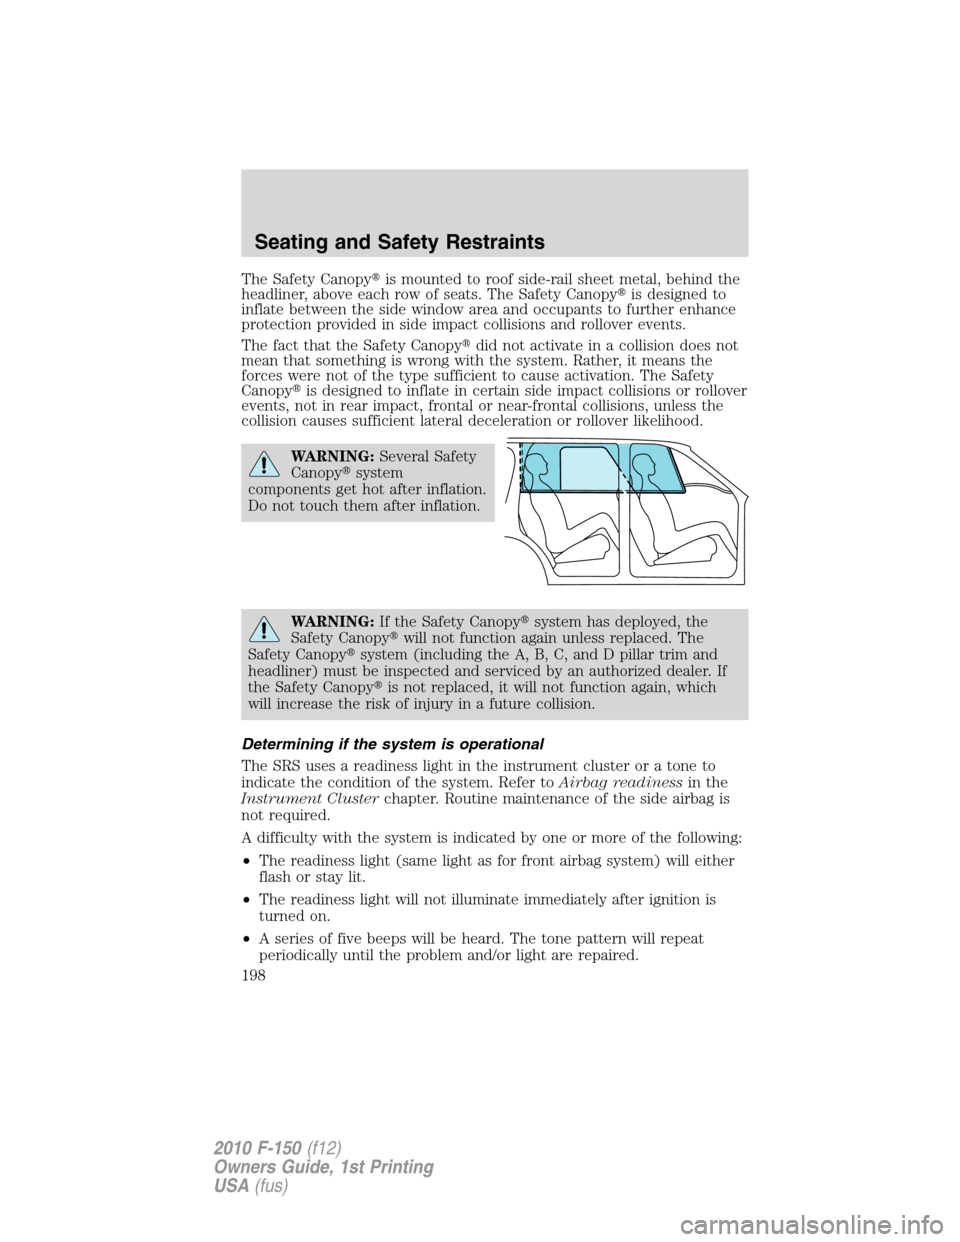 FORD F150 2010 12.G Repair Manual The Safety Canopyis mounted to roof side-rail sheet metal, behind the
headliner, above each row of seats. The Safety Canopyis designed to
inflate between the side window area and occupants to furthe